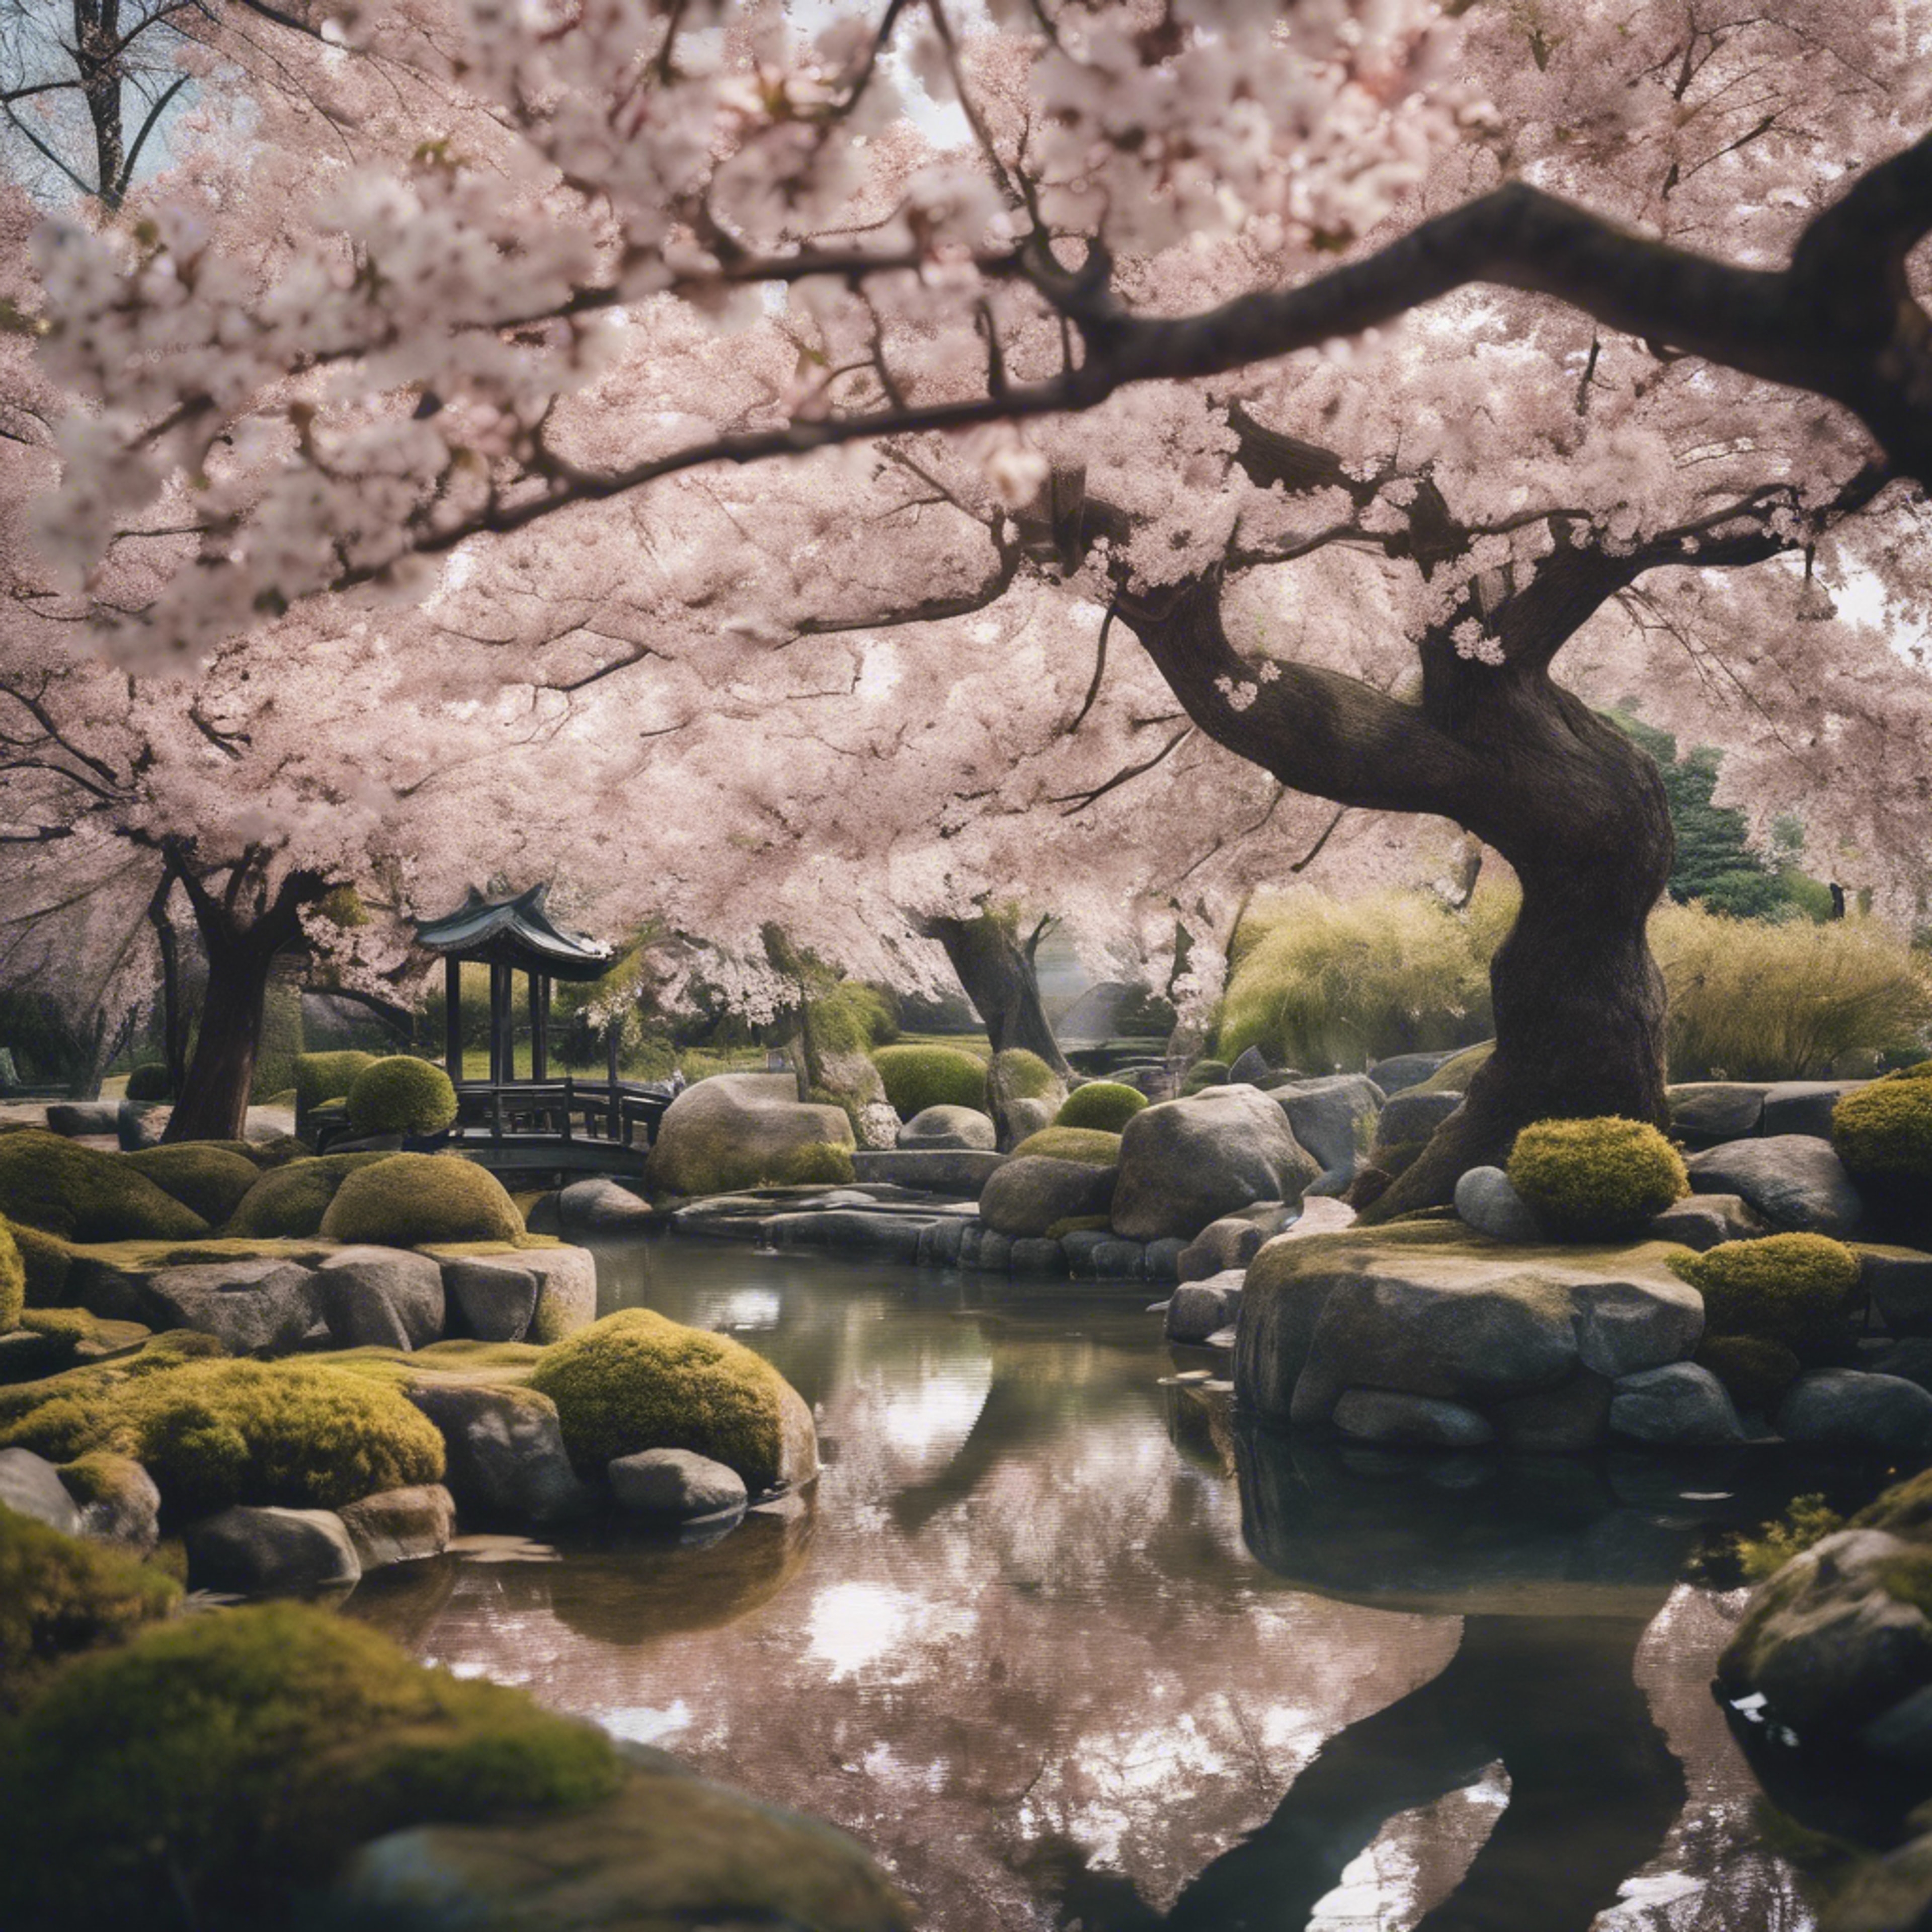 A wide-angle view of a serene Japanese garden with cherry blossoms in full bloom. Papel de parede[cf6d4e9694a4479cb5ff]